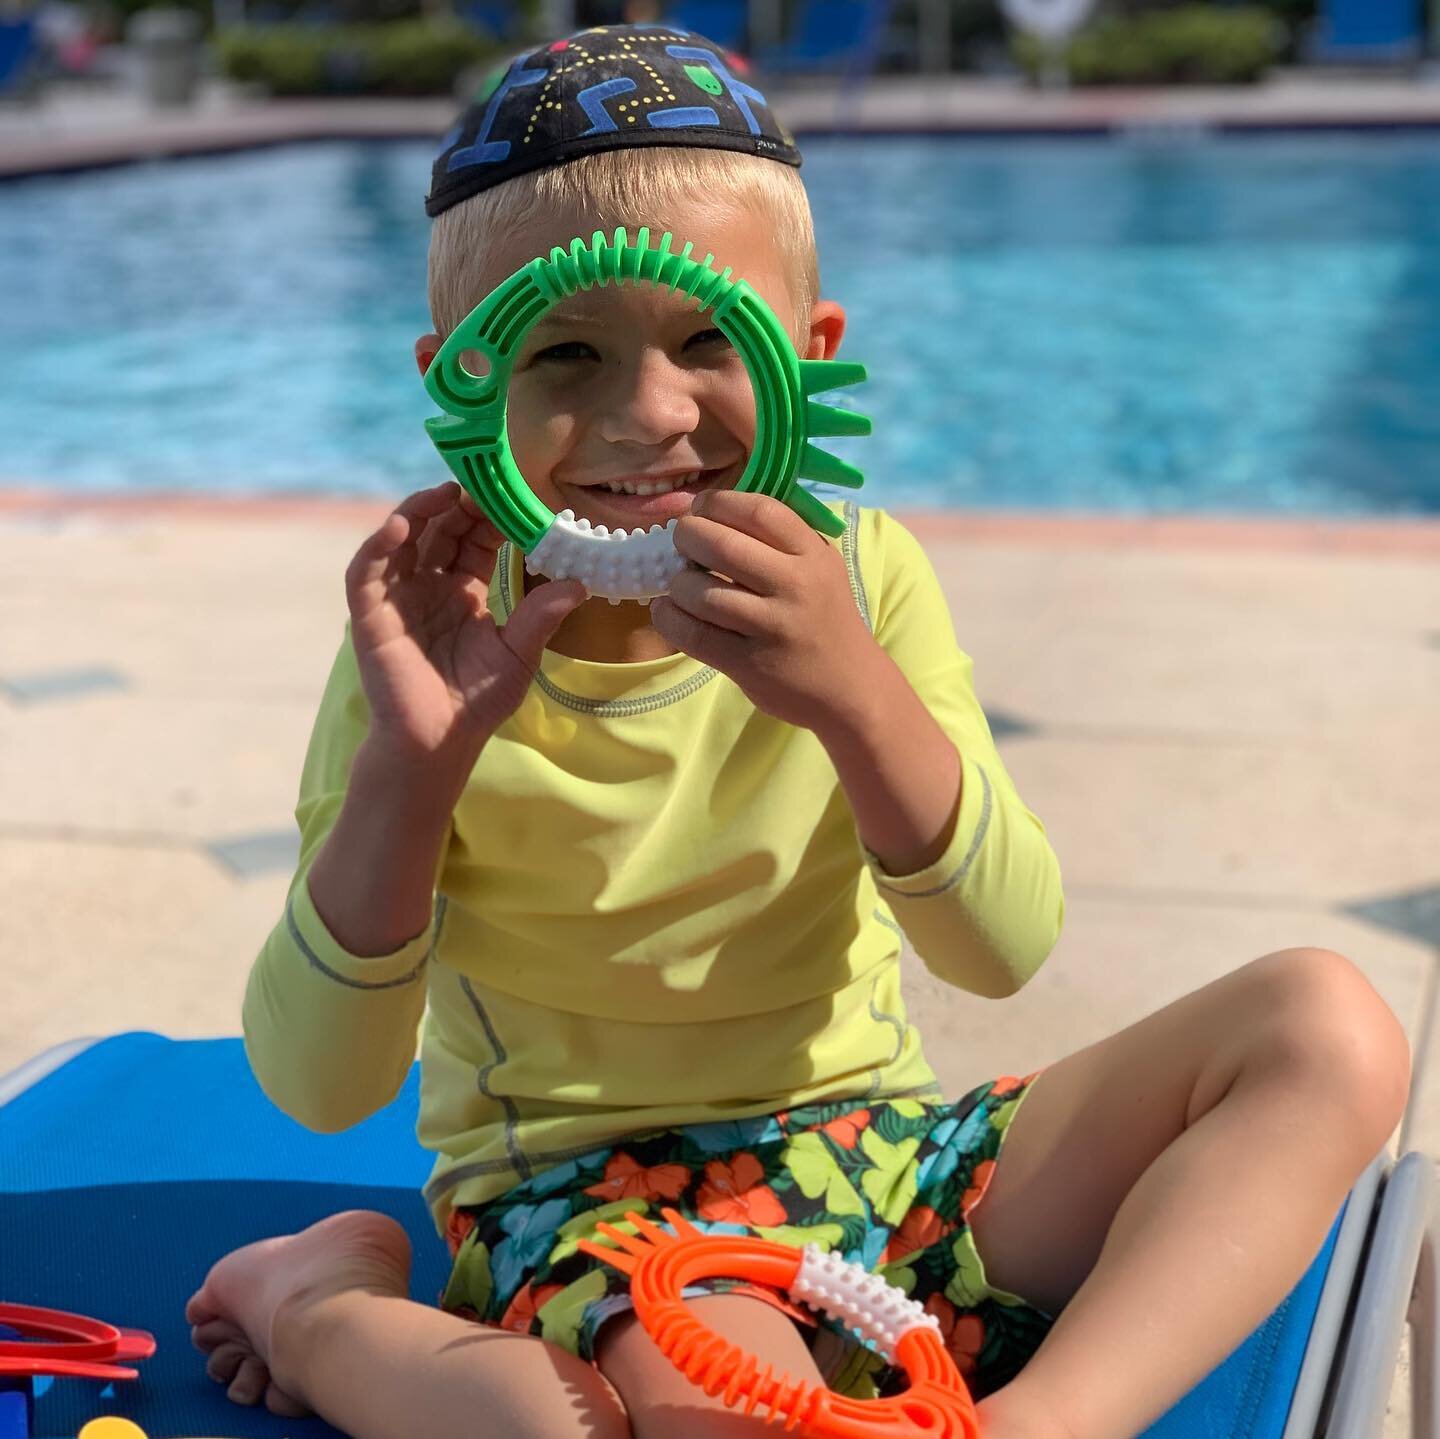 From a scale of 1 to 10&hellip;..I&rsquo;d say his level of excitement for swim lessons is a 13 🤩🐠💙
.
.
.
.
#safetyfirst #swimtraining #swimming #pool #swimlessons #athome #lifeguard #learnhowtoswim #swiminstructor #babyswimming #sunnyislesbeach #